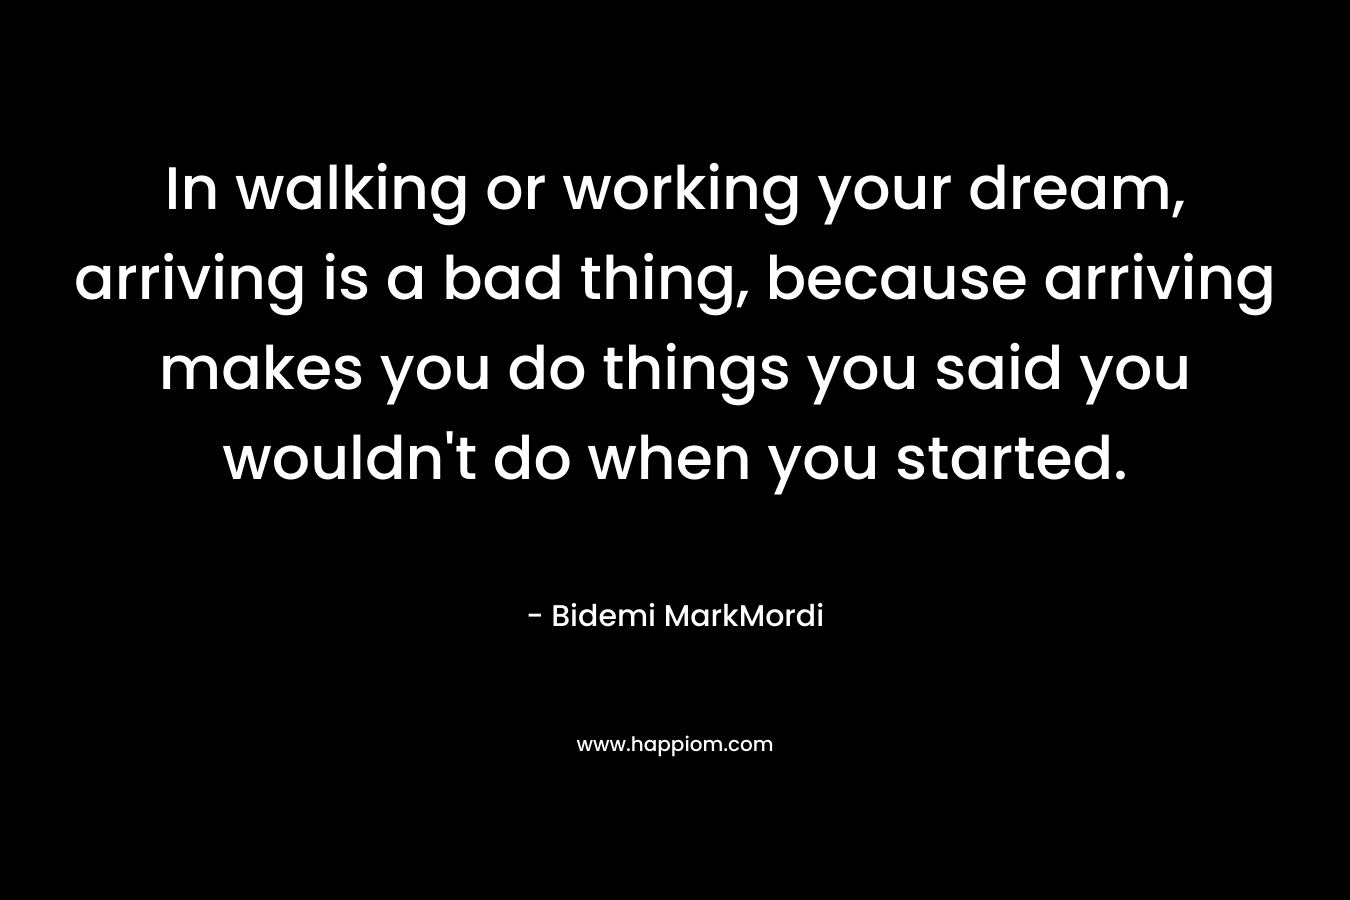 In walking or working your dream, arriving is a bad thing, because arriving makes you do things you said you wouldn’t do when you started. – Bidemi MarkMordi